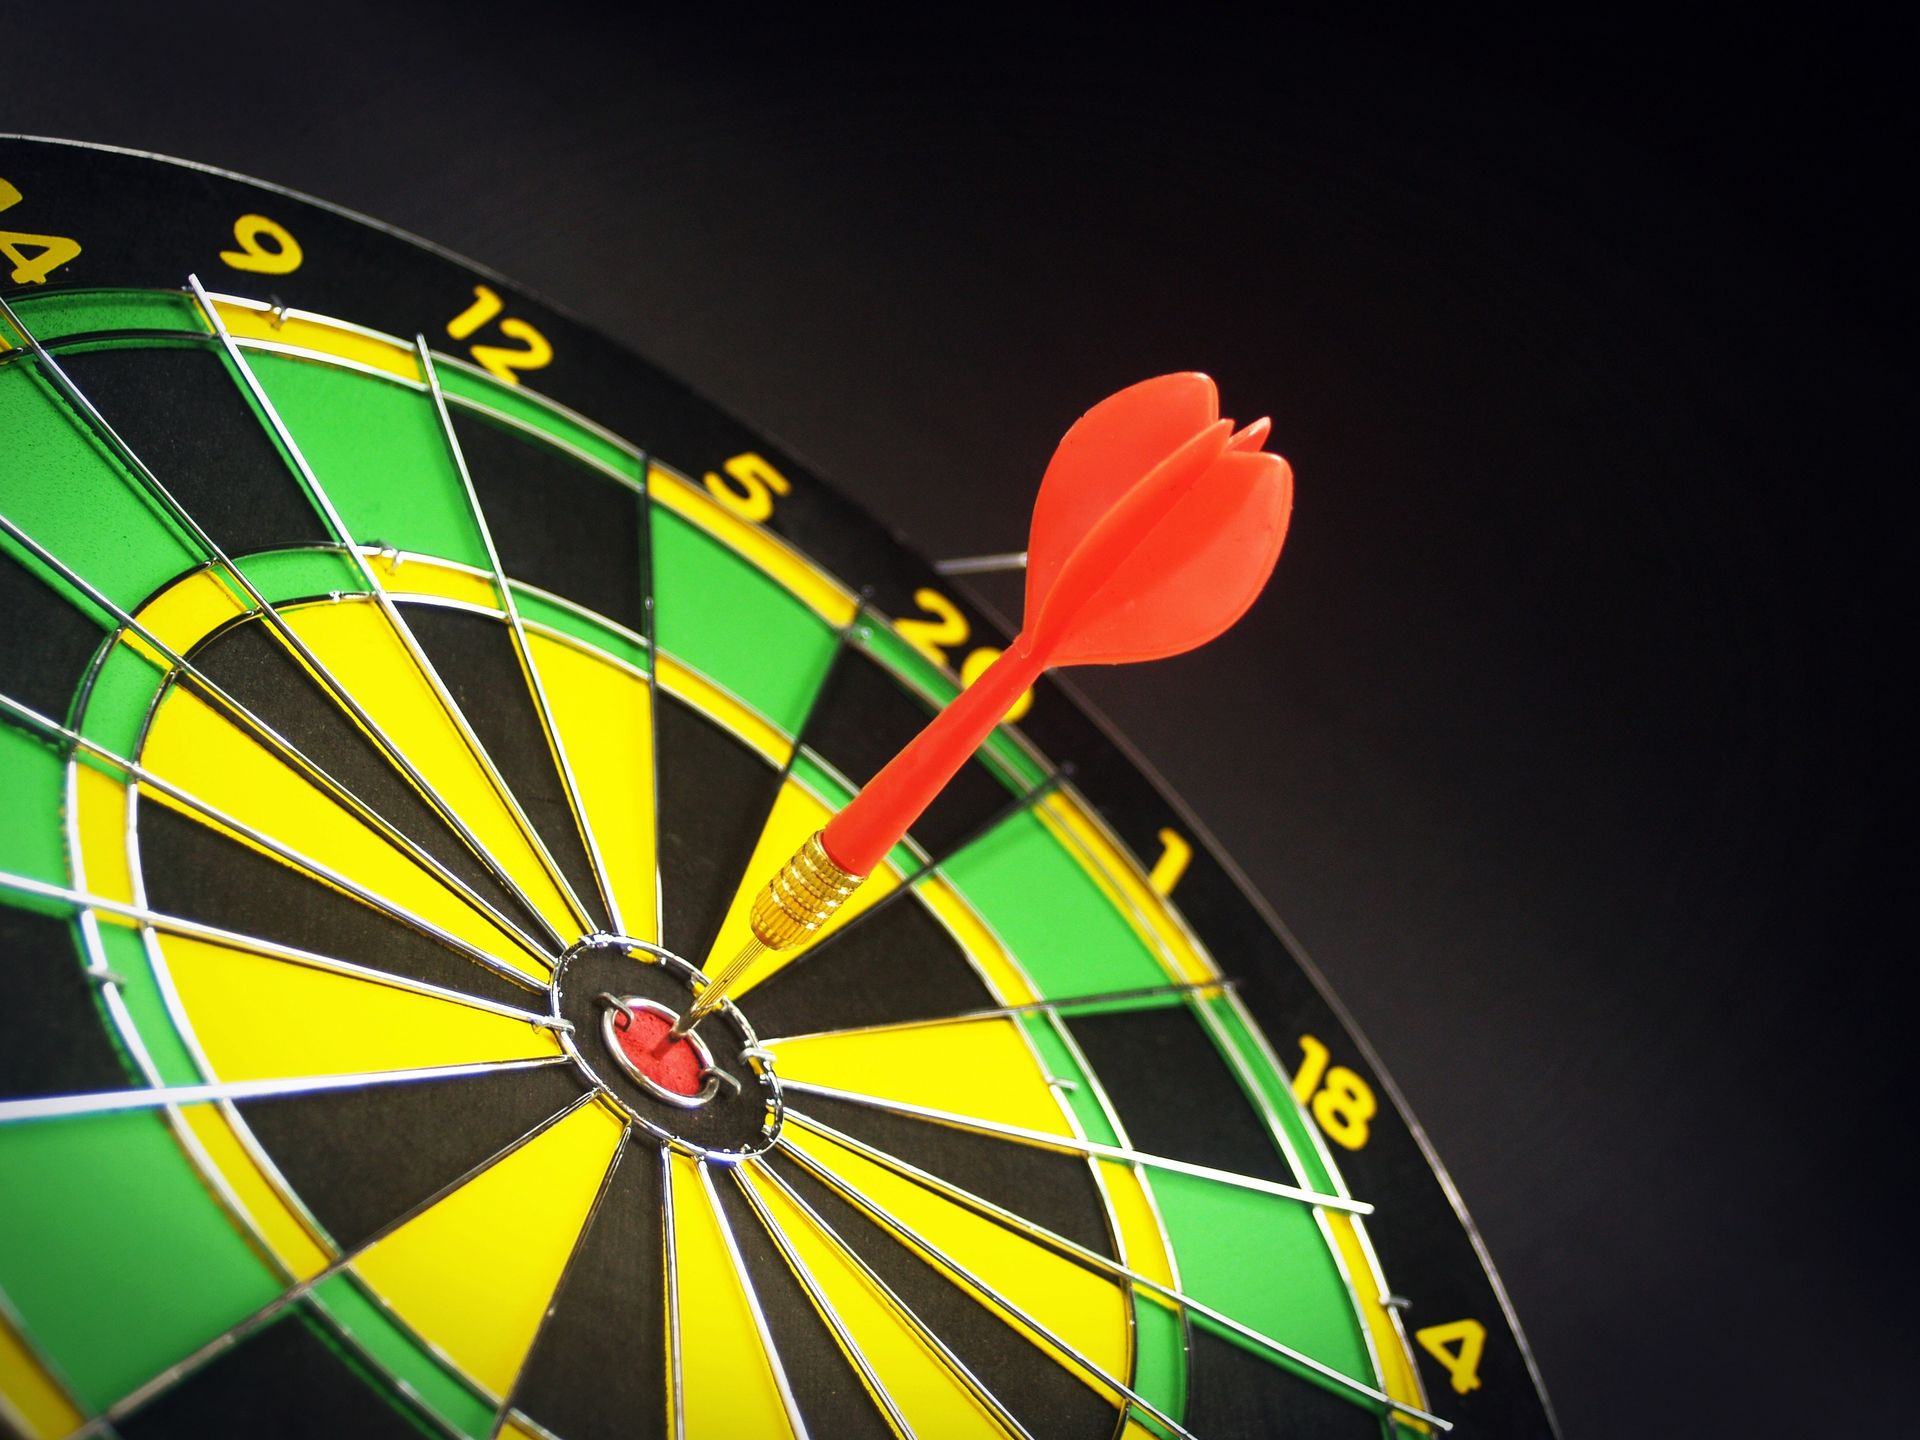 Dartboard with a red dart in the center